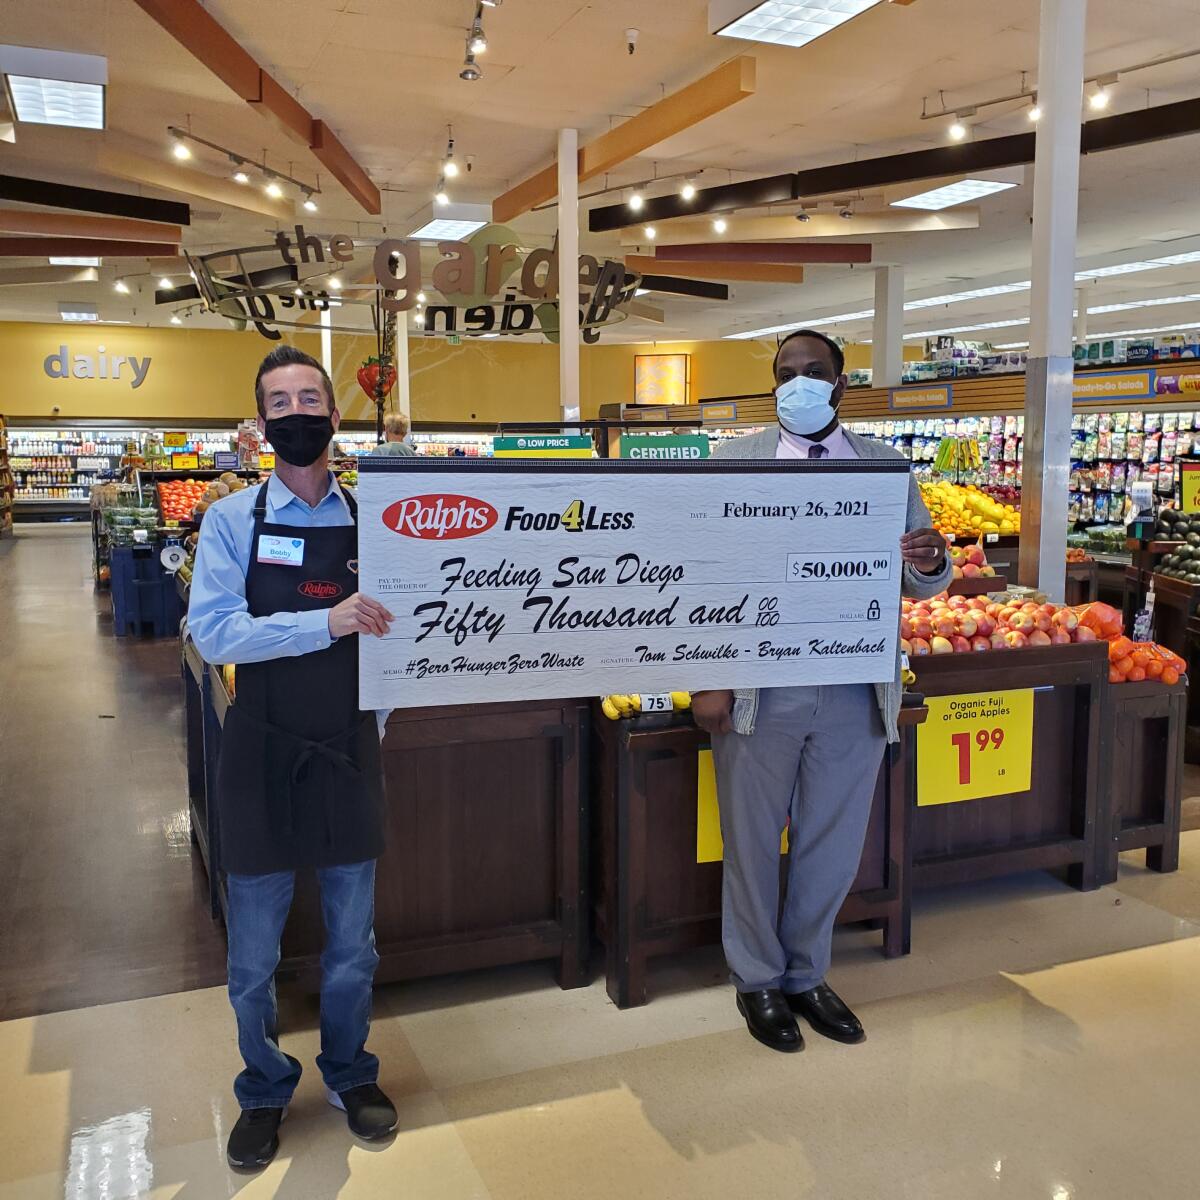 Maron Dean, store leader at the Encinitas Ralphs, presented the $50,000 check to Feeding San Diego.